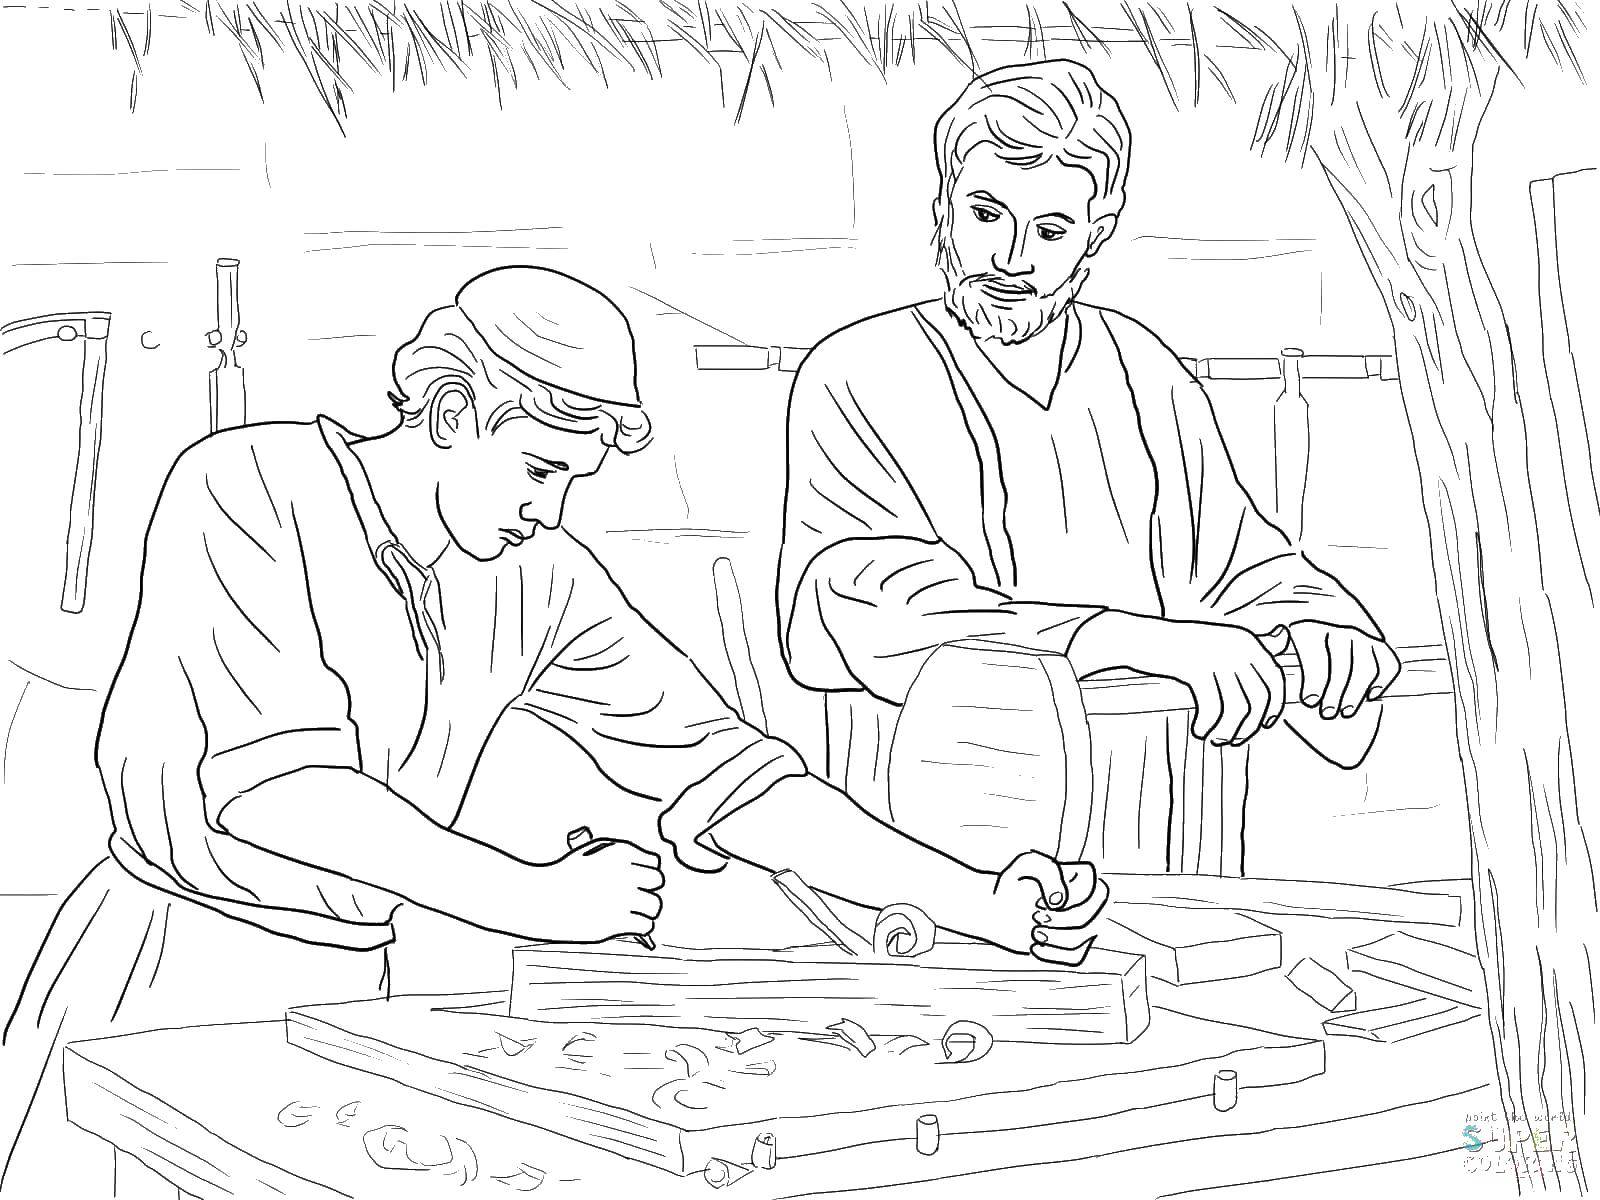 Coloring Carpenters. Category Religion. Tags:  carpenters.